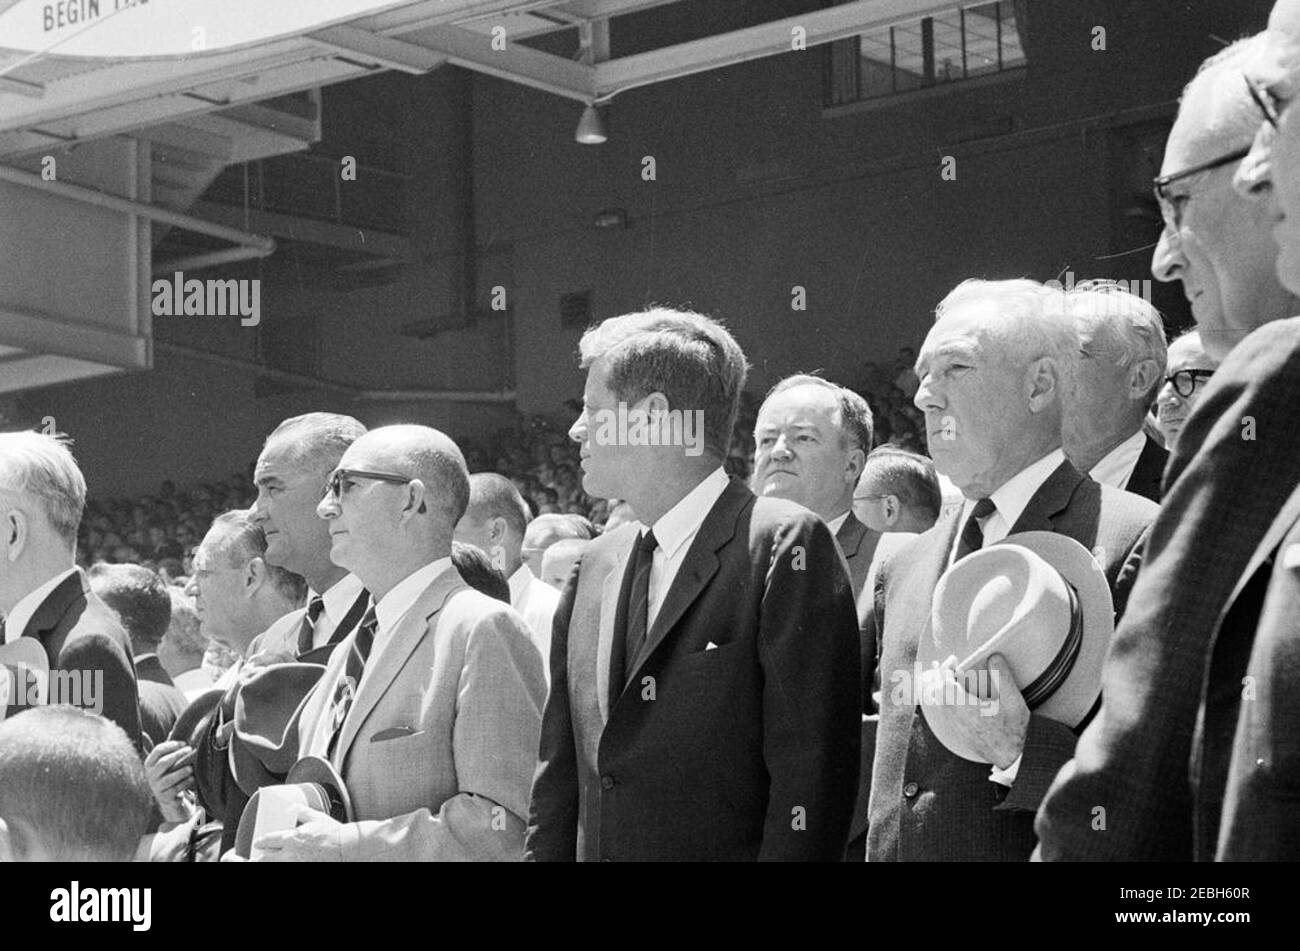 1962 All Star Baseball Game at D.C. Stadium, 12:52PM. President John F. Kennedy and others stand for the National Anthem during the 32nd Major League Baseball (MLB) All-Star Game at D.C. Stadium, Washington, D.C. Those pictured with President Kennedy include: Vice President Lyndon B. Johnson; Special Assistant to the President, Dave Powers; Senator Hubert H. Humphrey (Minnesota); Commissioner of Baseball, Ford C. Frick; Deputy Special Counsel to the President, Myer Feldman. [Scratch in upper right corner of image is original to the negative.] Stock Photo